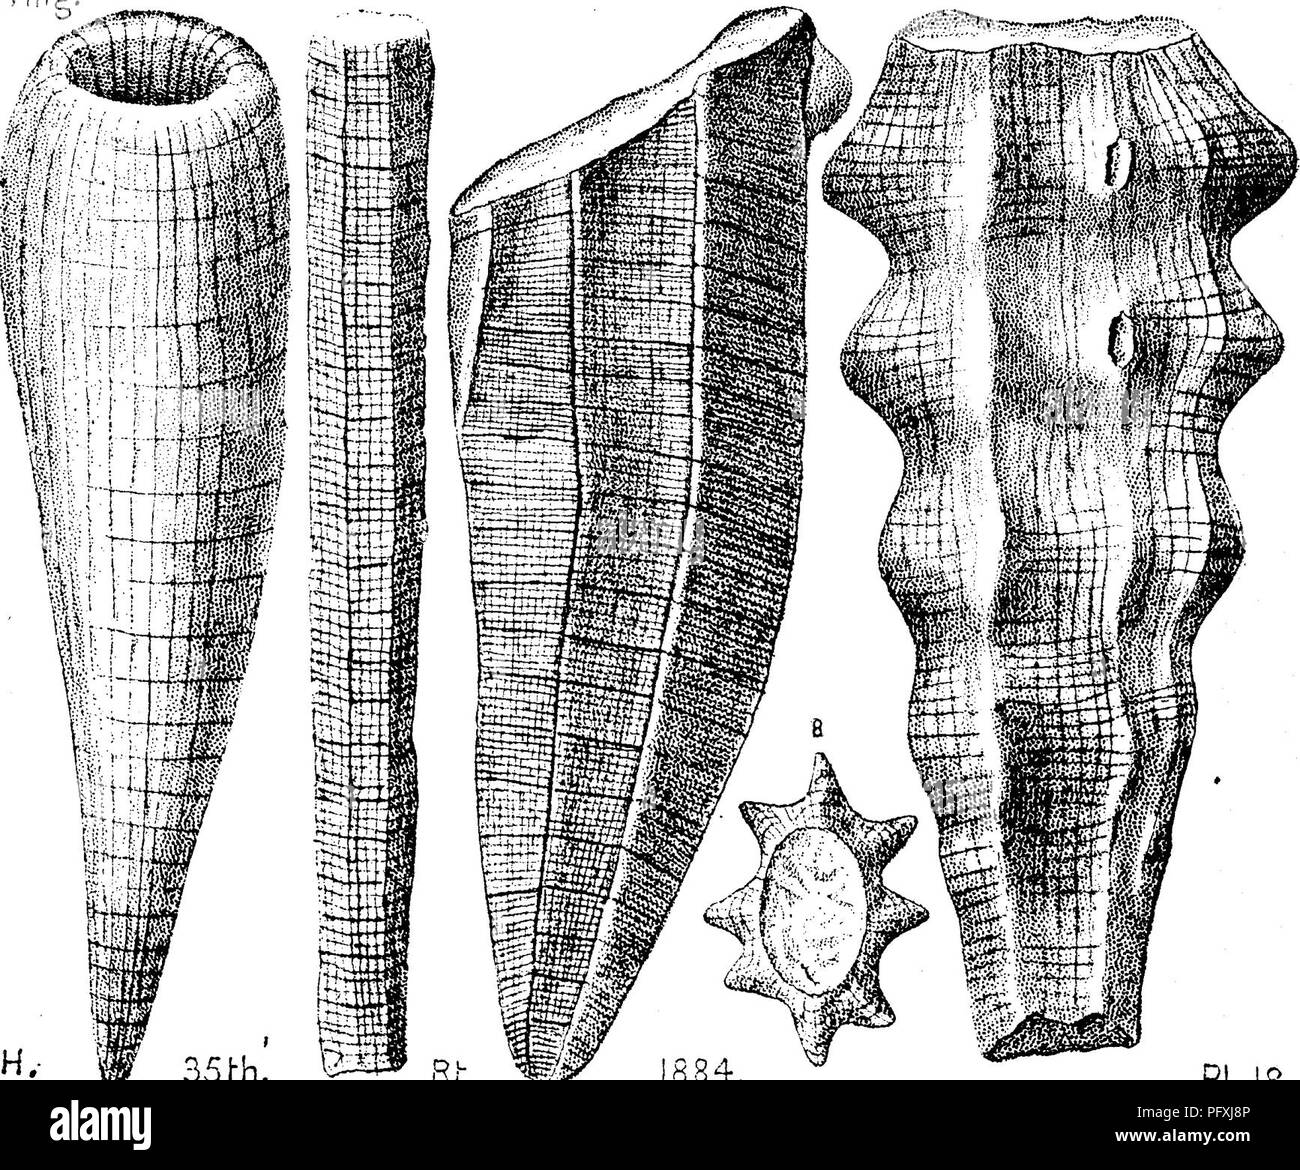 . A dictionary of the fossils of Pennsylvania and neighboring states named in the reports and catalogues of the survey ... Paleontology. DiCT. 200 Dictyophytonprismaticum (figs. 2, 3,4 like D. conradi) : ^ifM^y/^'^^^-:;:i»:Tm!!«ffr!^t^i^'^.. and D. tuberosum (fig. 7.) selected from a range of forms given by Hall in the 35th An. Kt. N- Y. State Museum, 1884, plate (17) 18, figs. 1 to 8, showing how all the forms of this ancient sponge are naturally developed from Cyathophycus reticulatiis of Walcott.—Abundant at many places in northern Pennsylvania and southern N Y. in Chemung^ VIII g. Dictyop Stock Photo